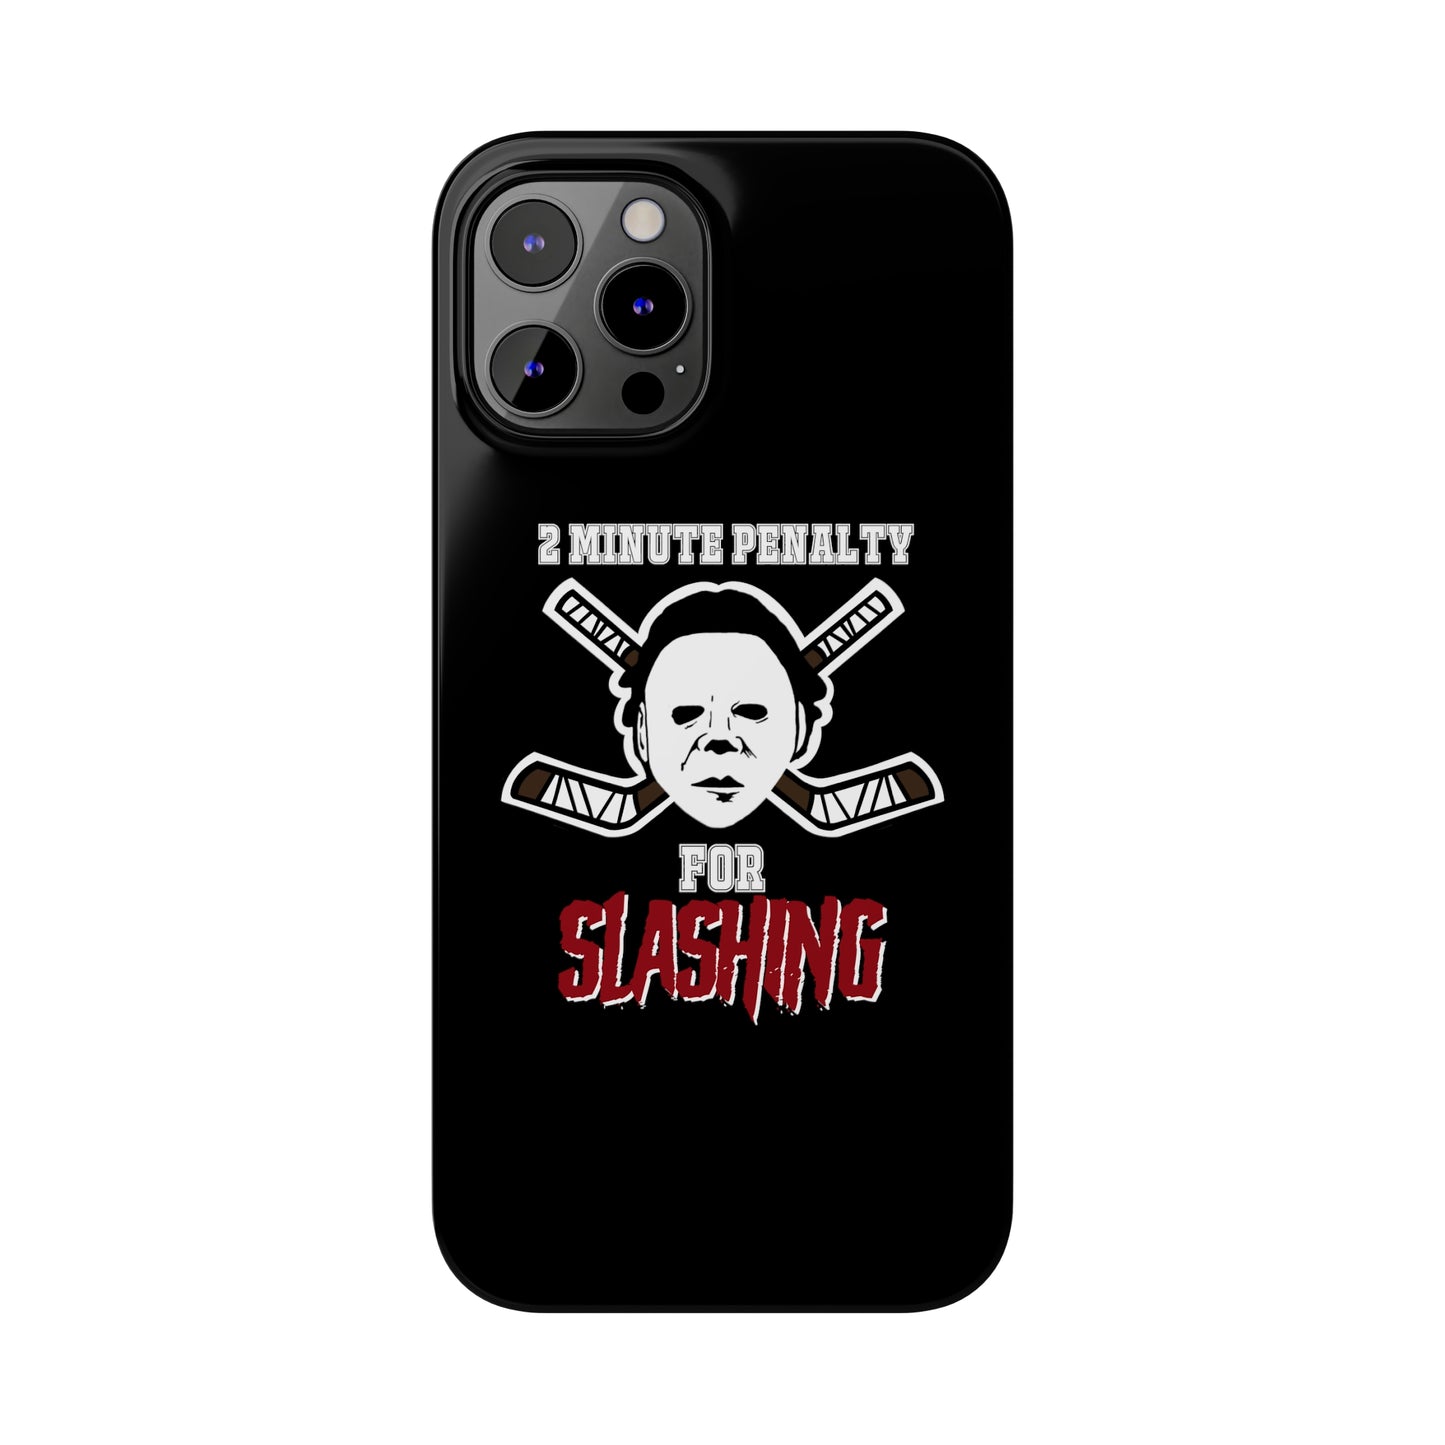 Myers Penalty Phone Case